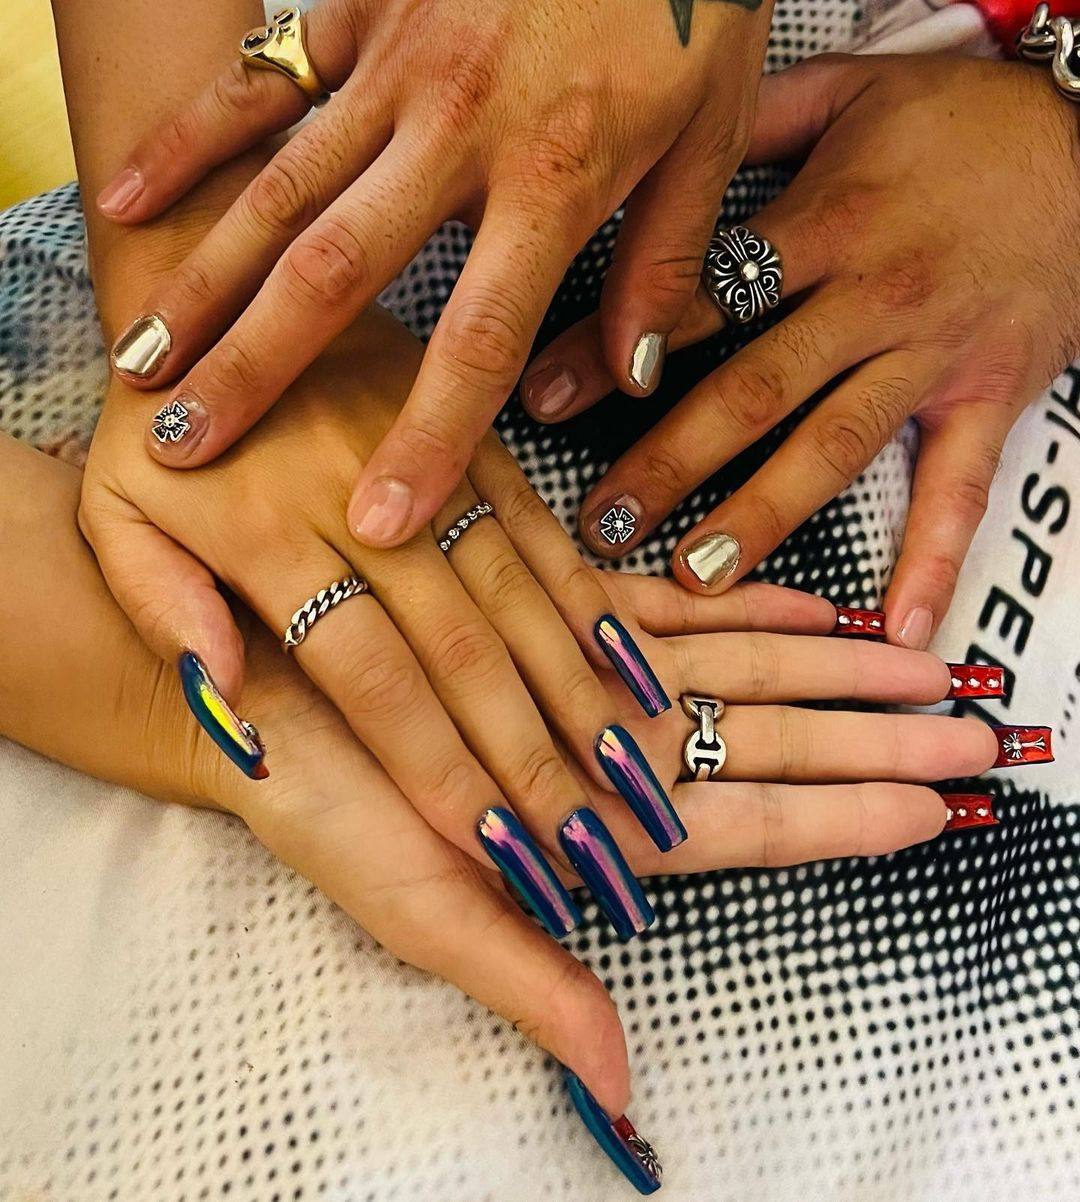 Hailey Bieber's Post-Wedding Manicure Is a Fall Trend in the